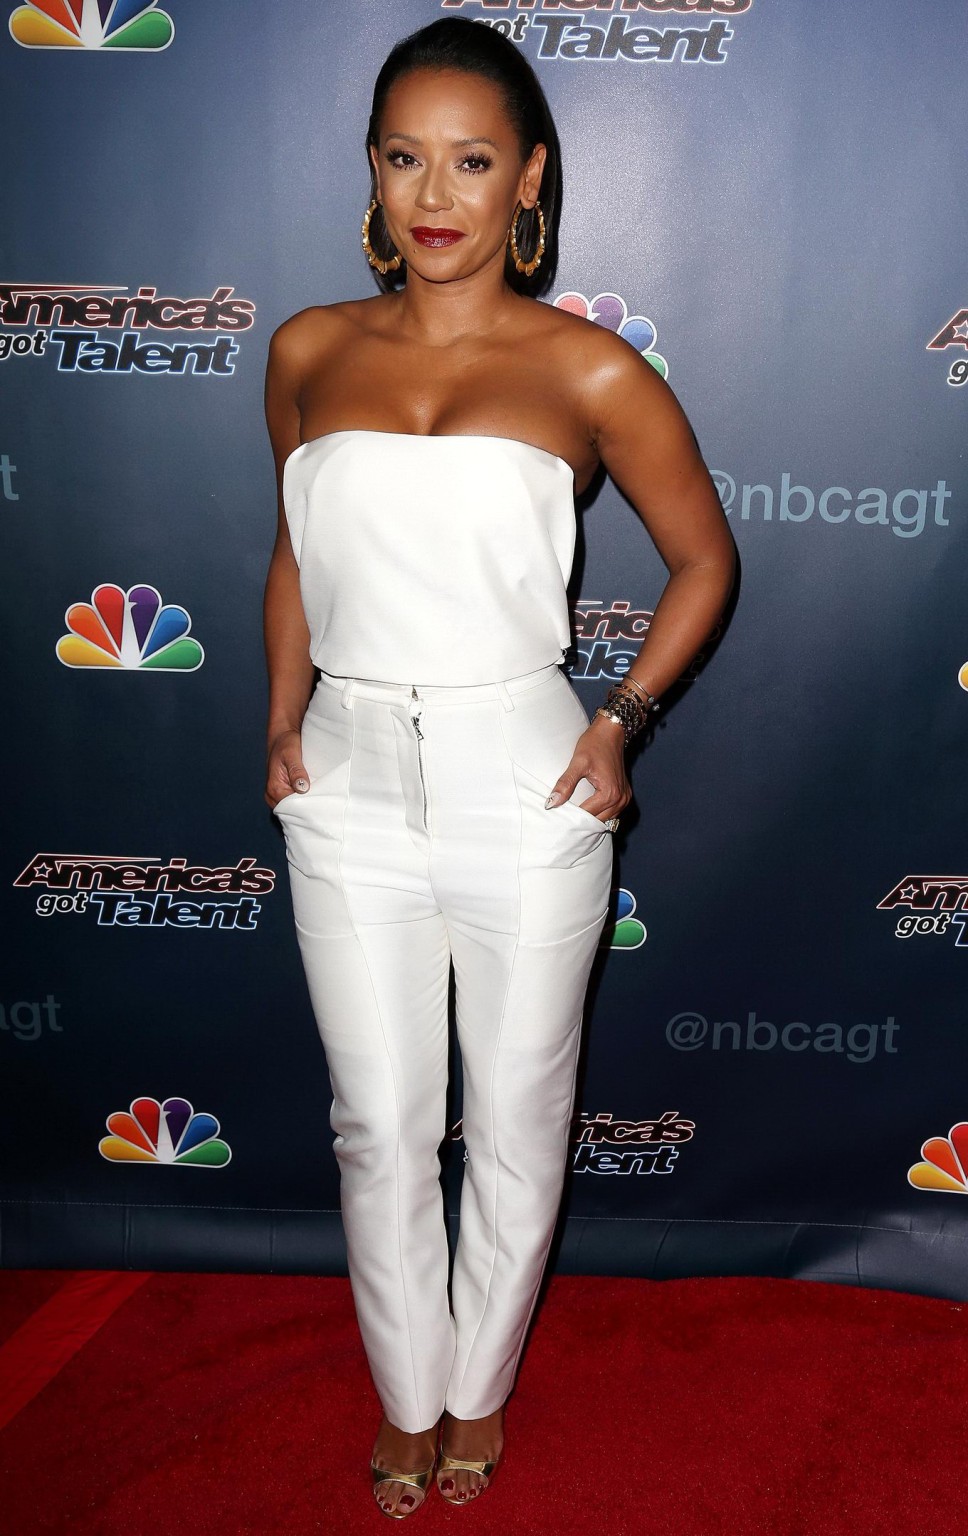 Melanie Brown busty wearing a strapless top at the Americas Got Talent season 9  #75185465